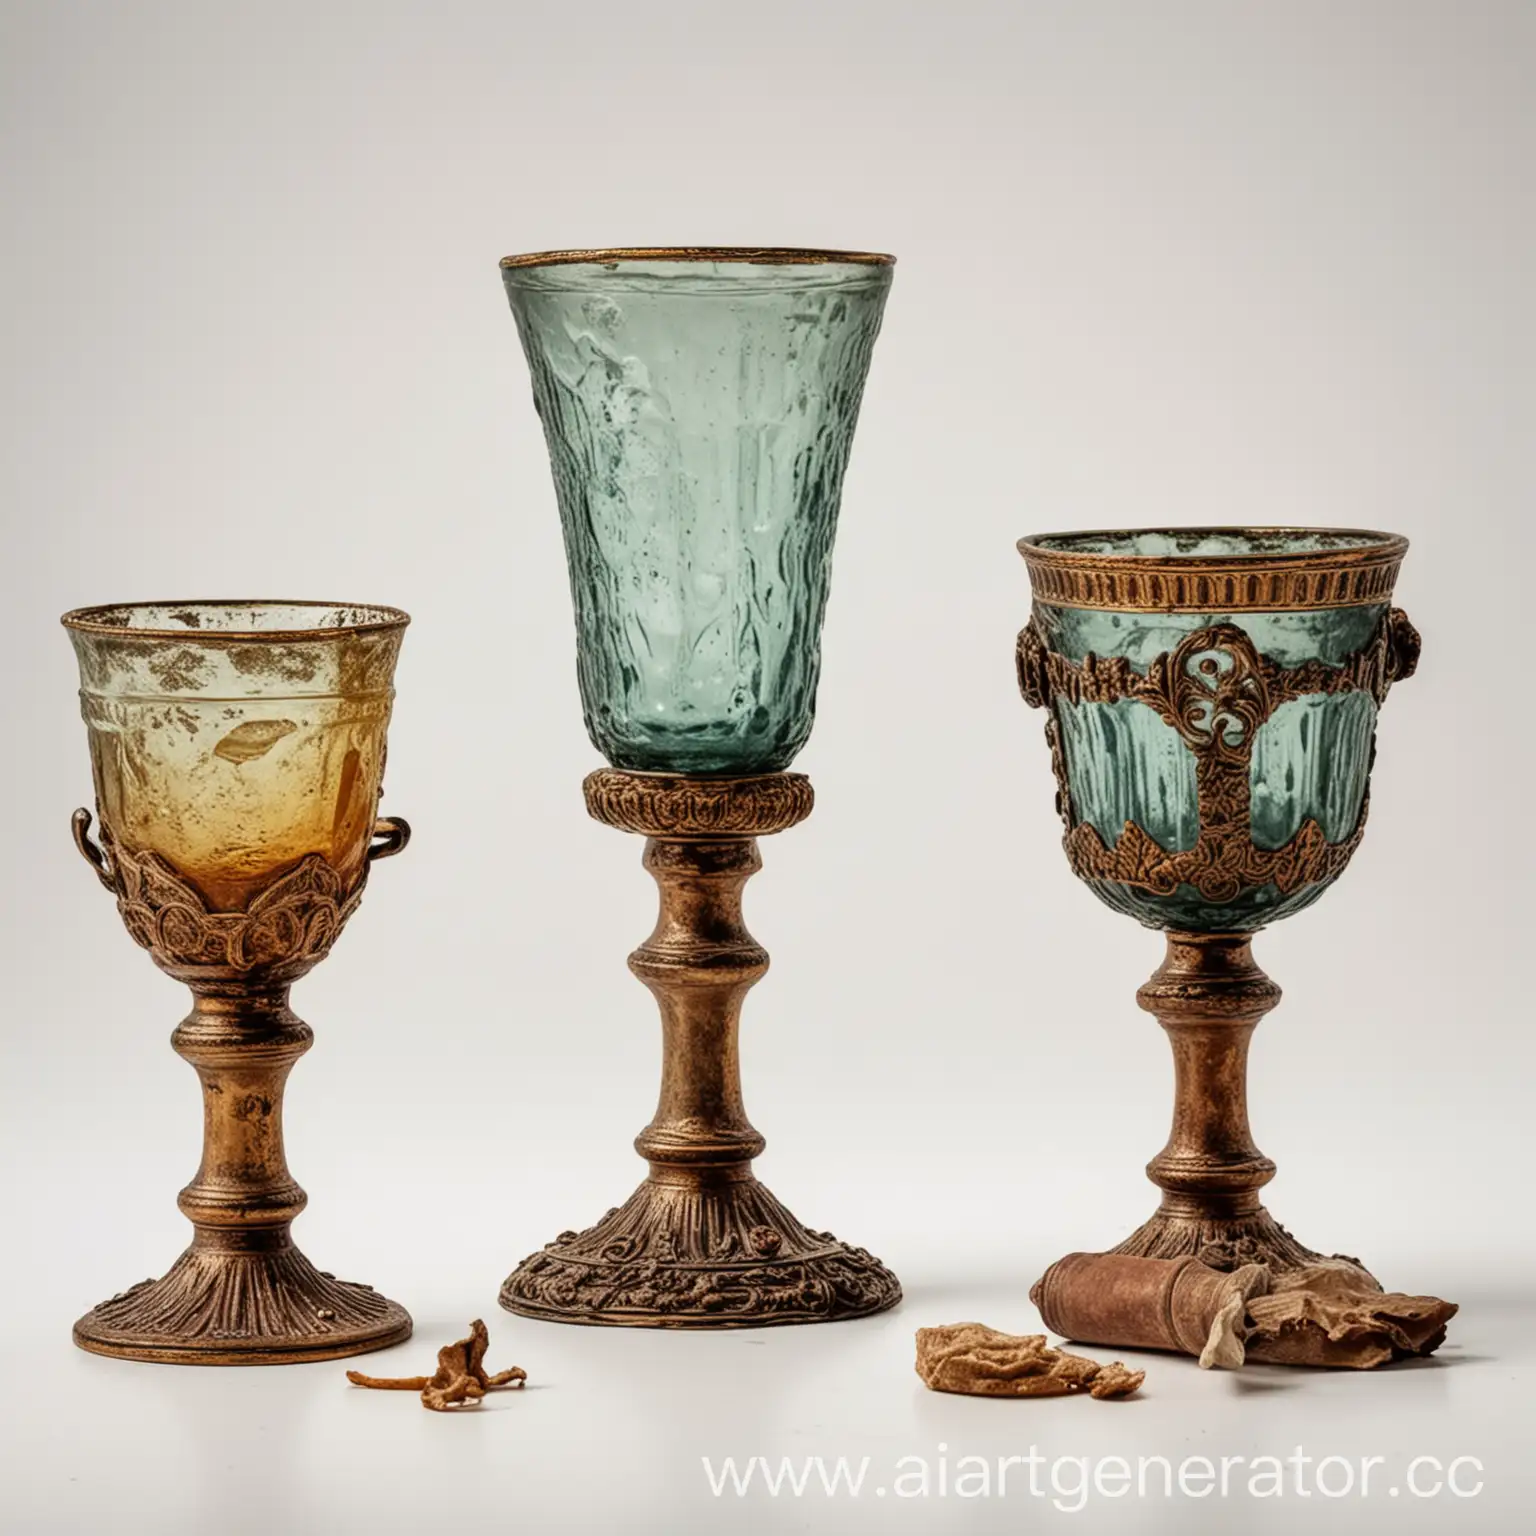 Antiquity-Ancient-Drinks-in-Unusual-Glasses-and-Goblets